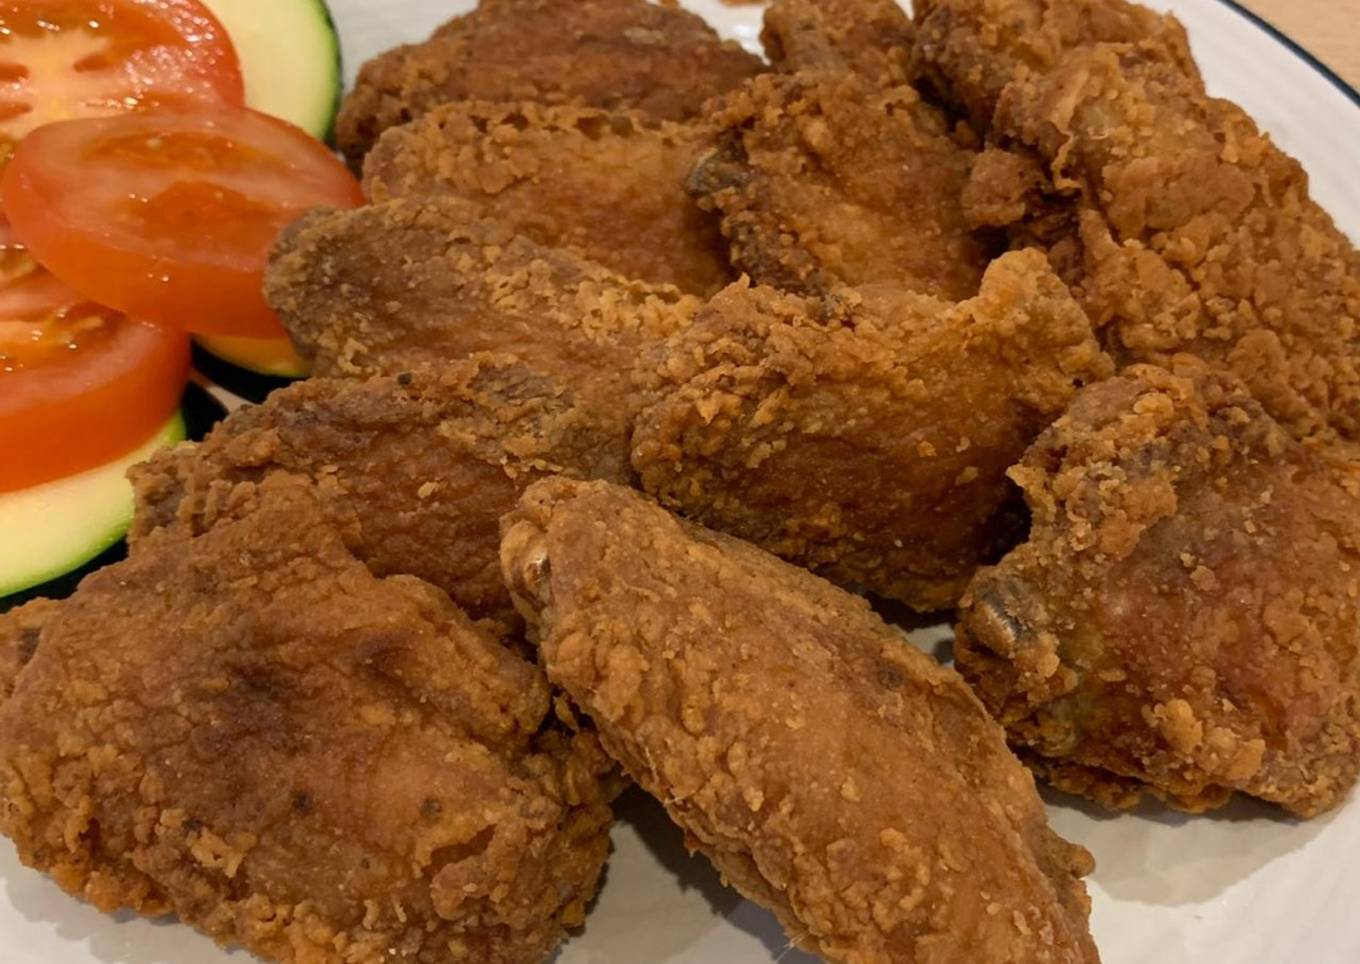 Fried chicken wings: Midnight Diner Series from Netflix